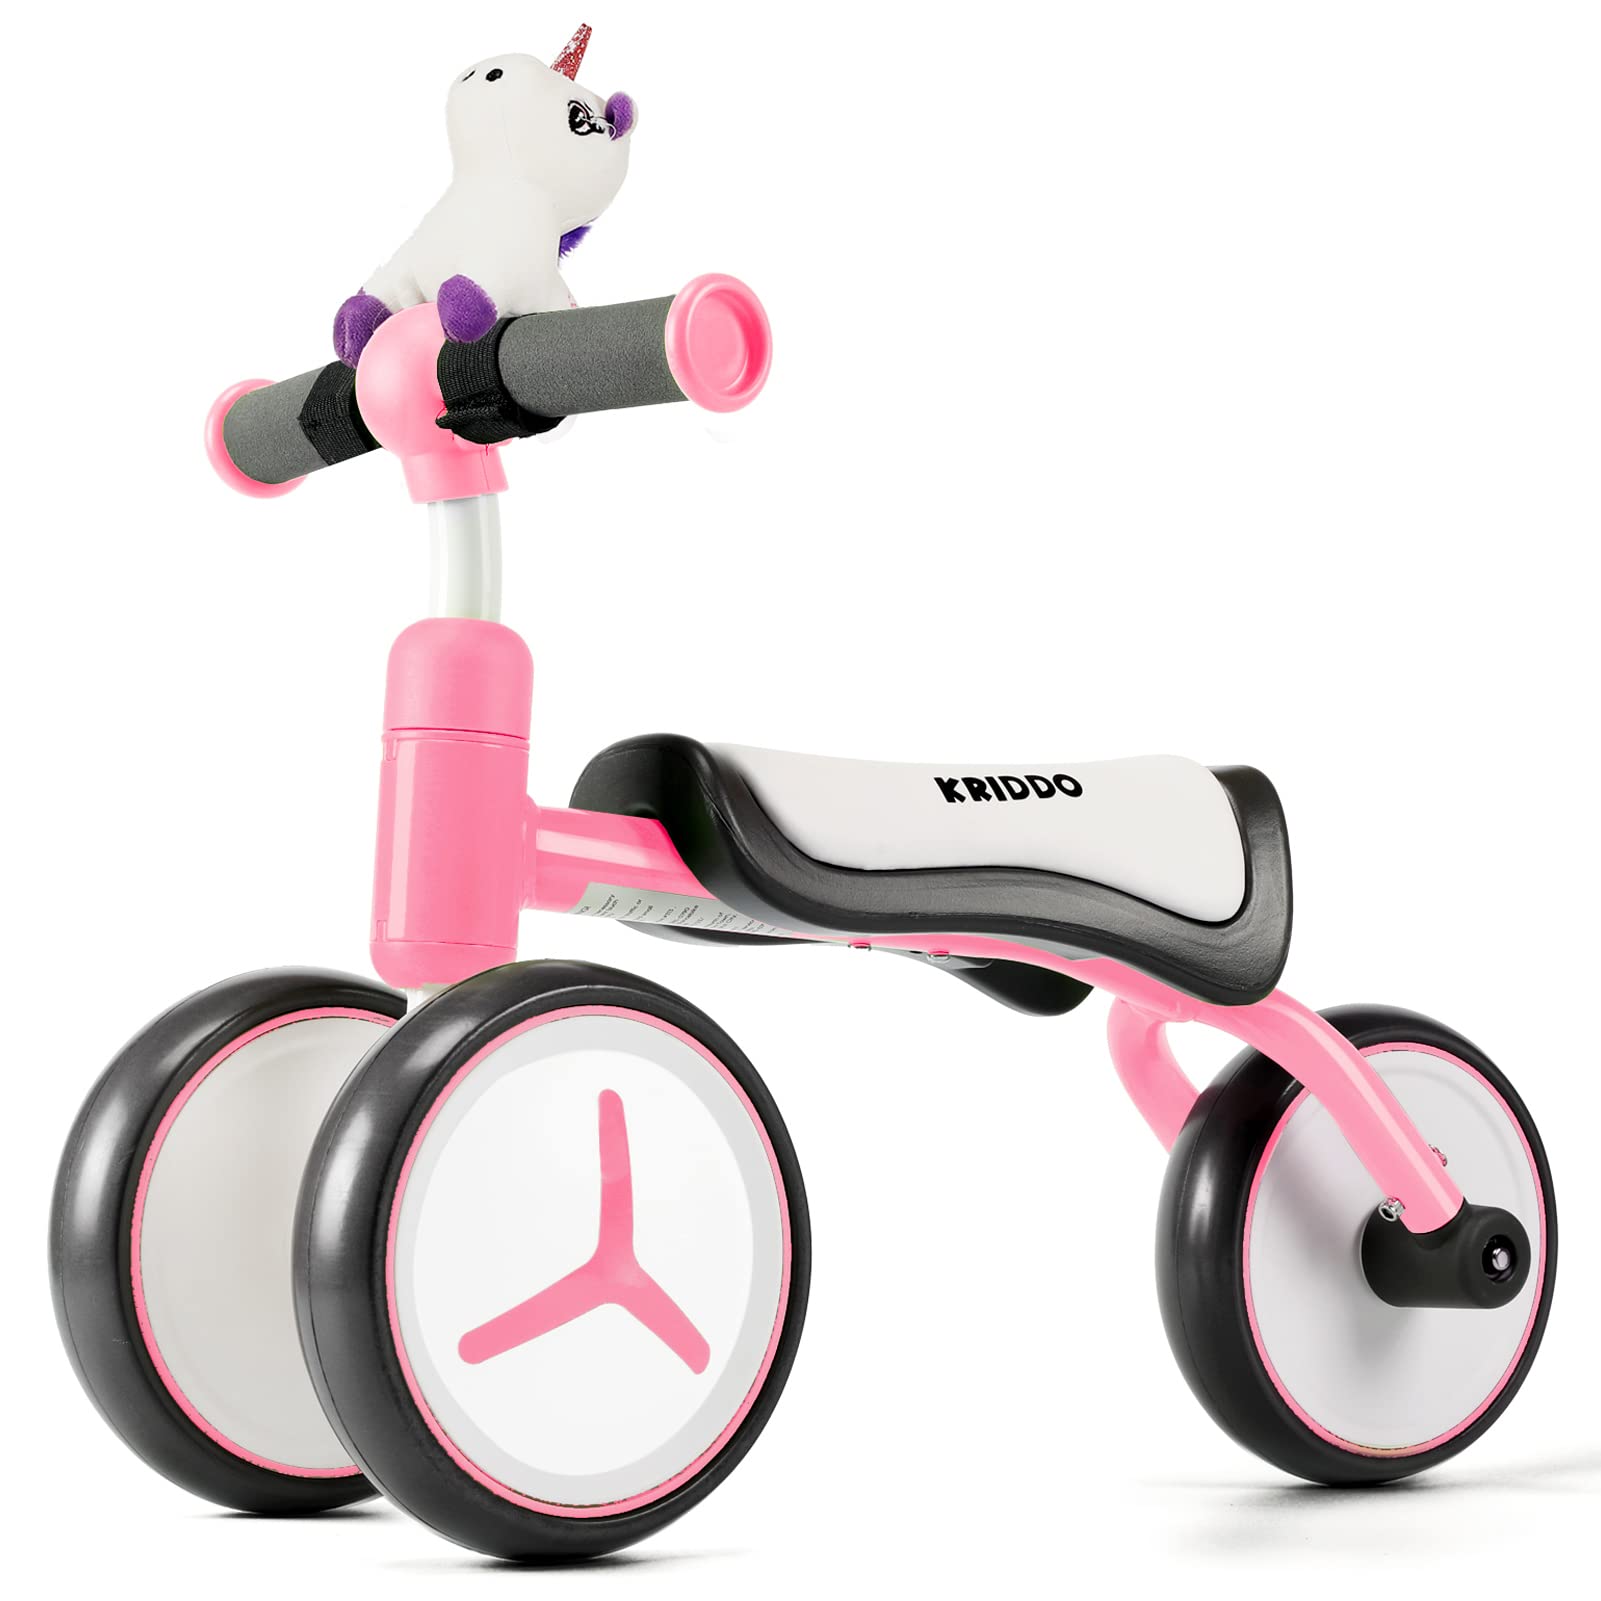 KRIDDO Baby Balance Bike for 1-2 Year Old Boy and Girl, Toddler Mini Bike for One Year Old First Birthday Gifts Baby Toys 12 Months to 2 Year Old Ride-on Toys Gifts Indoor Outdoor Balance Bike, Unicorn